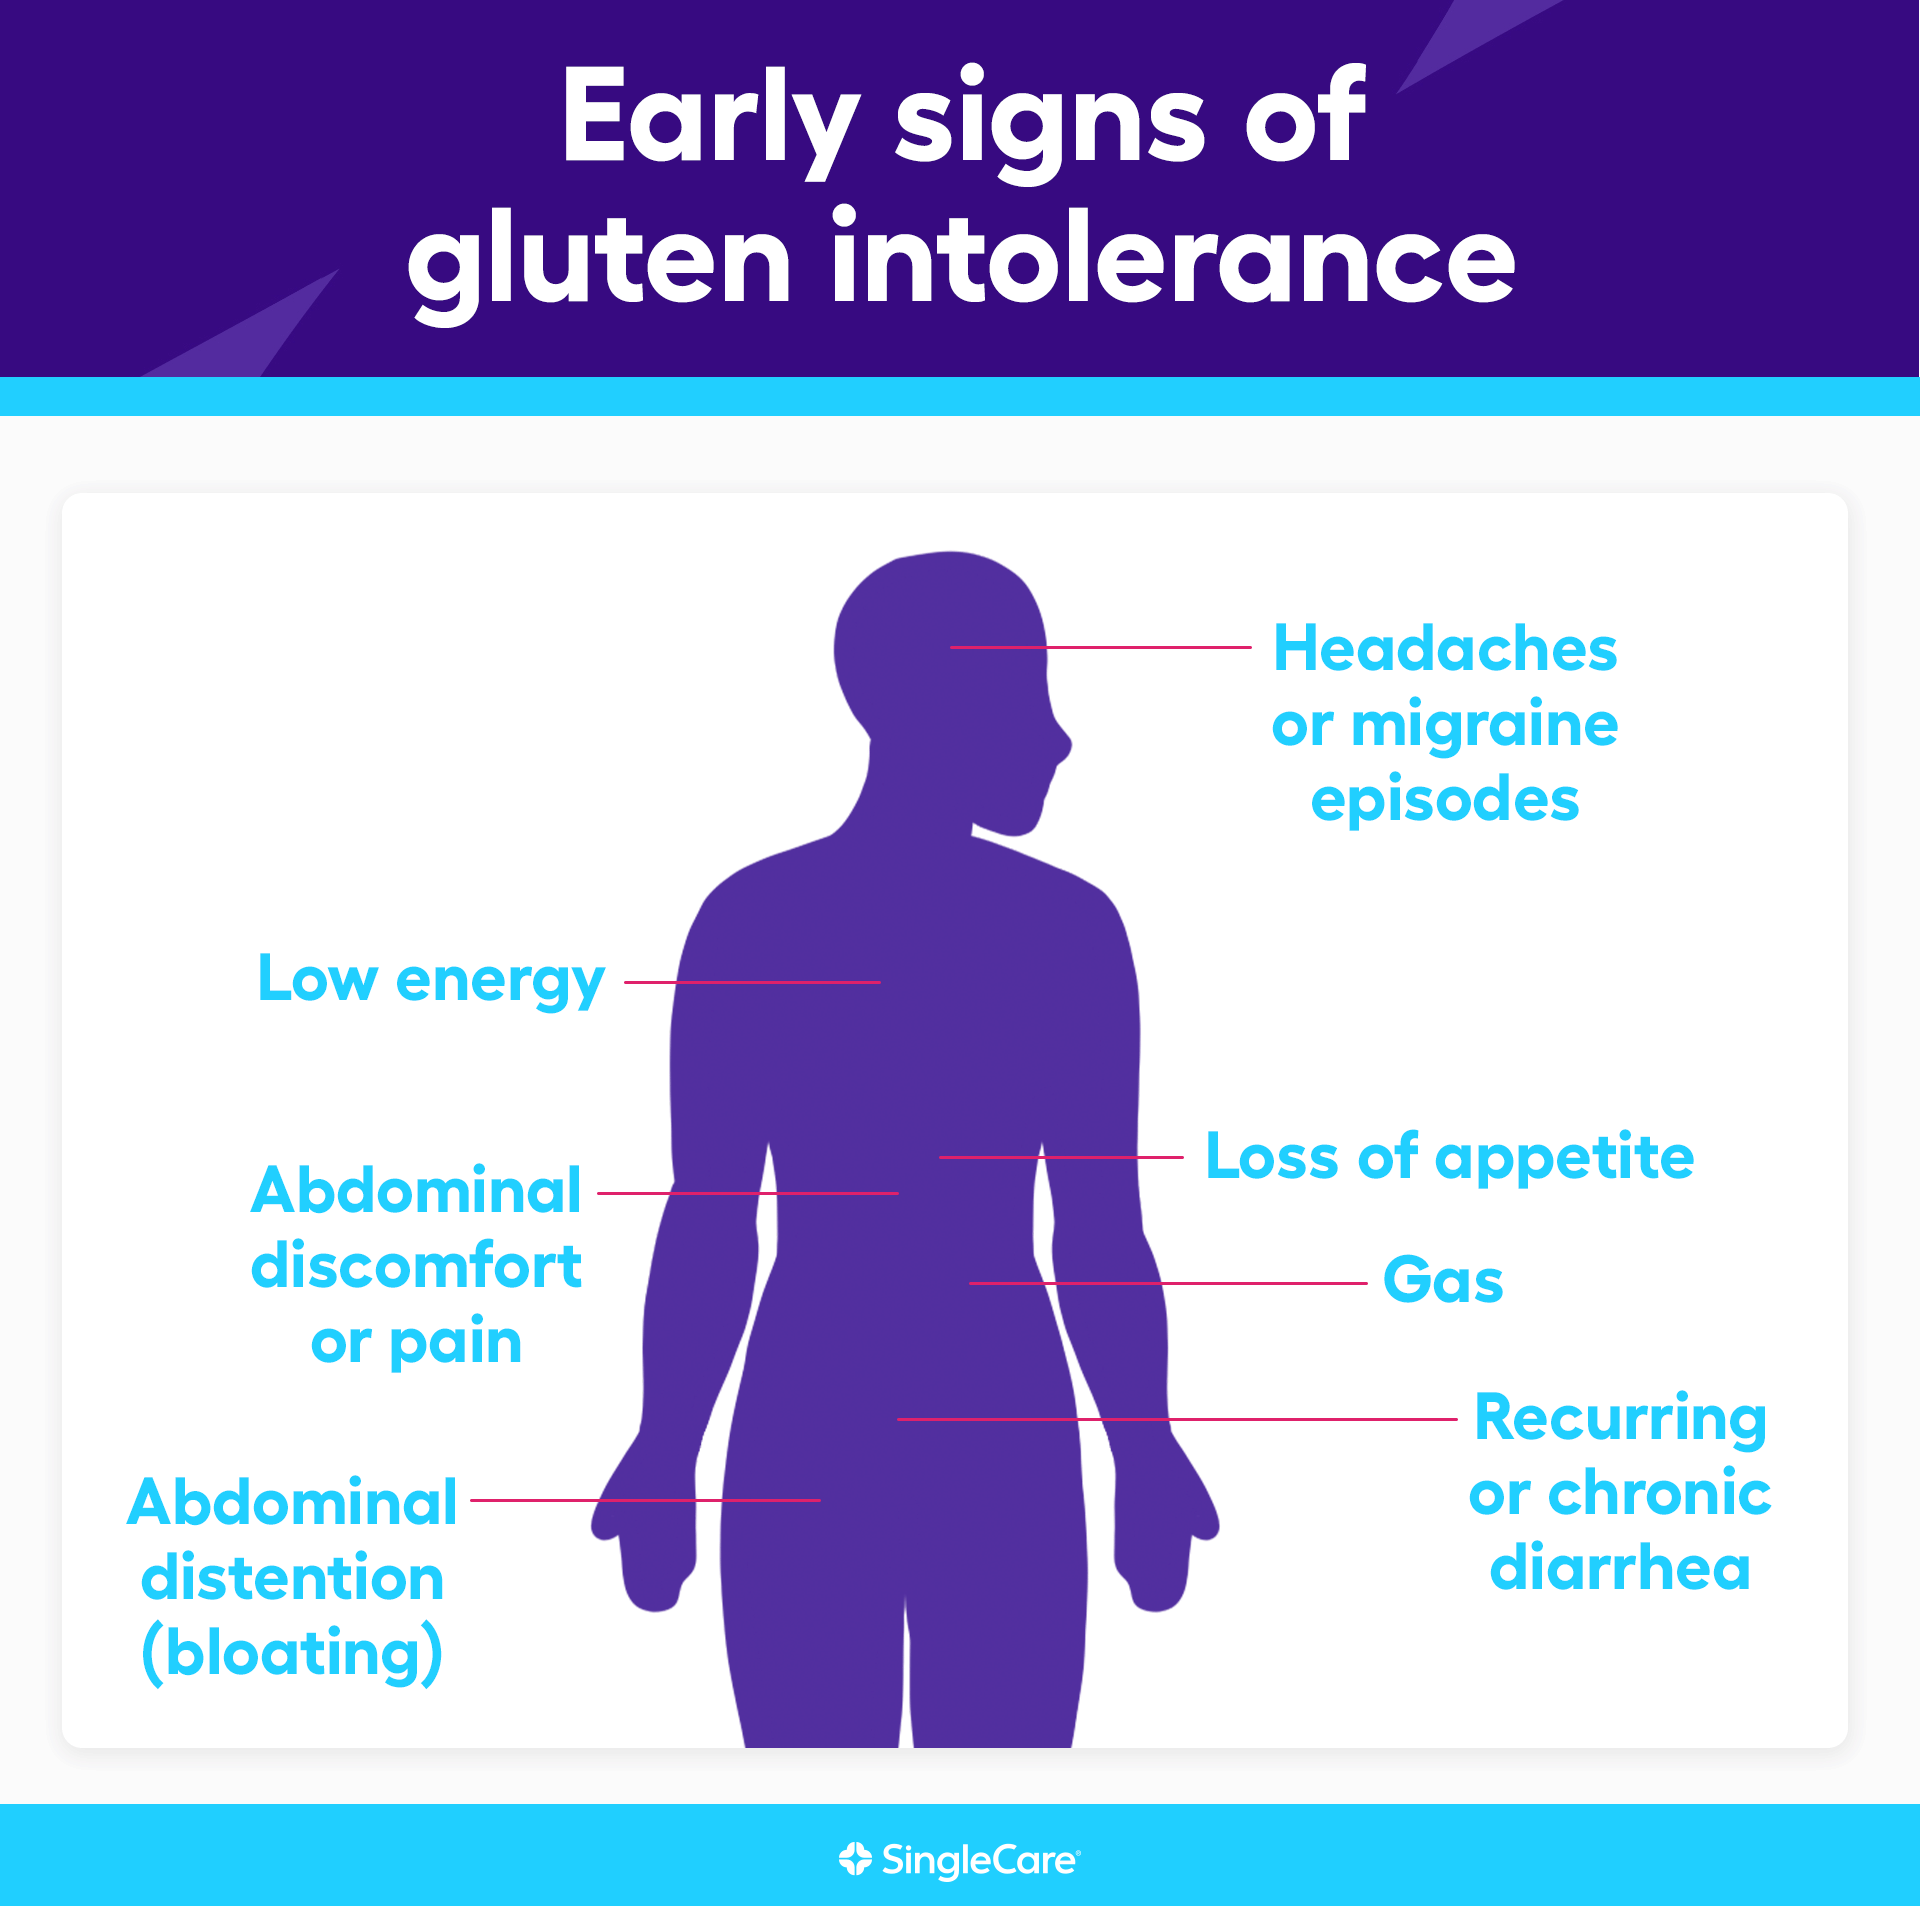 What are the early signs of gluten intolerance? 